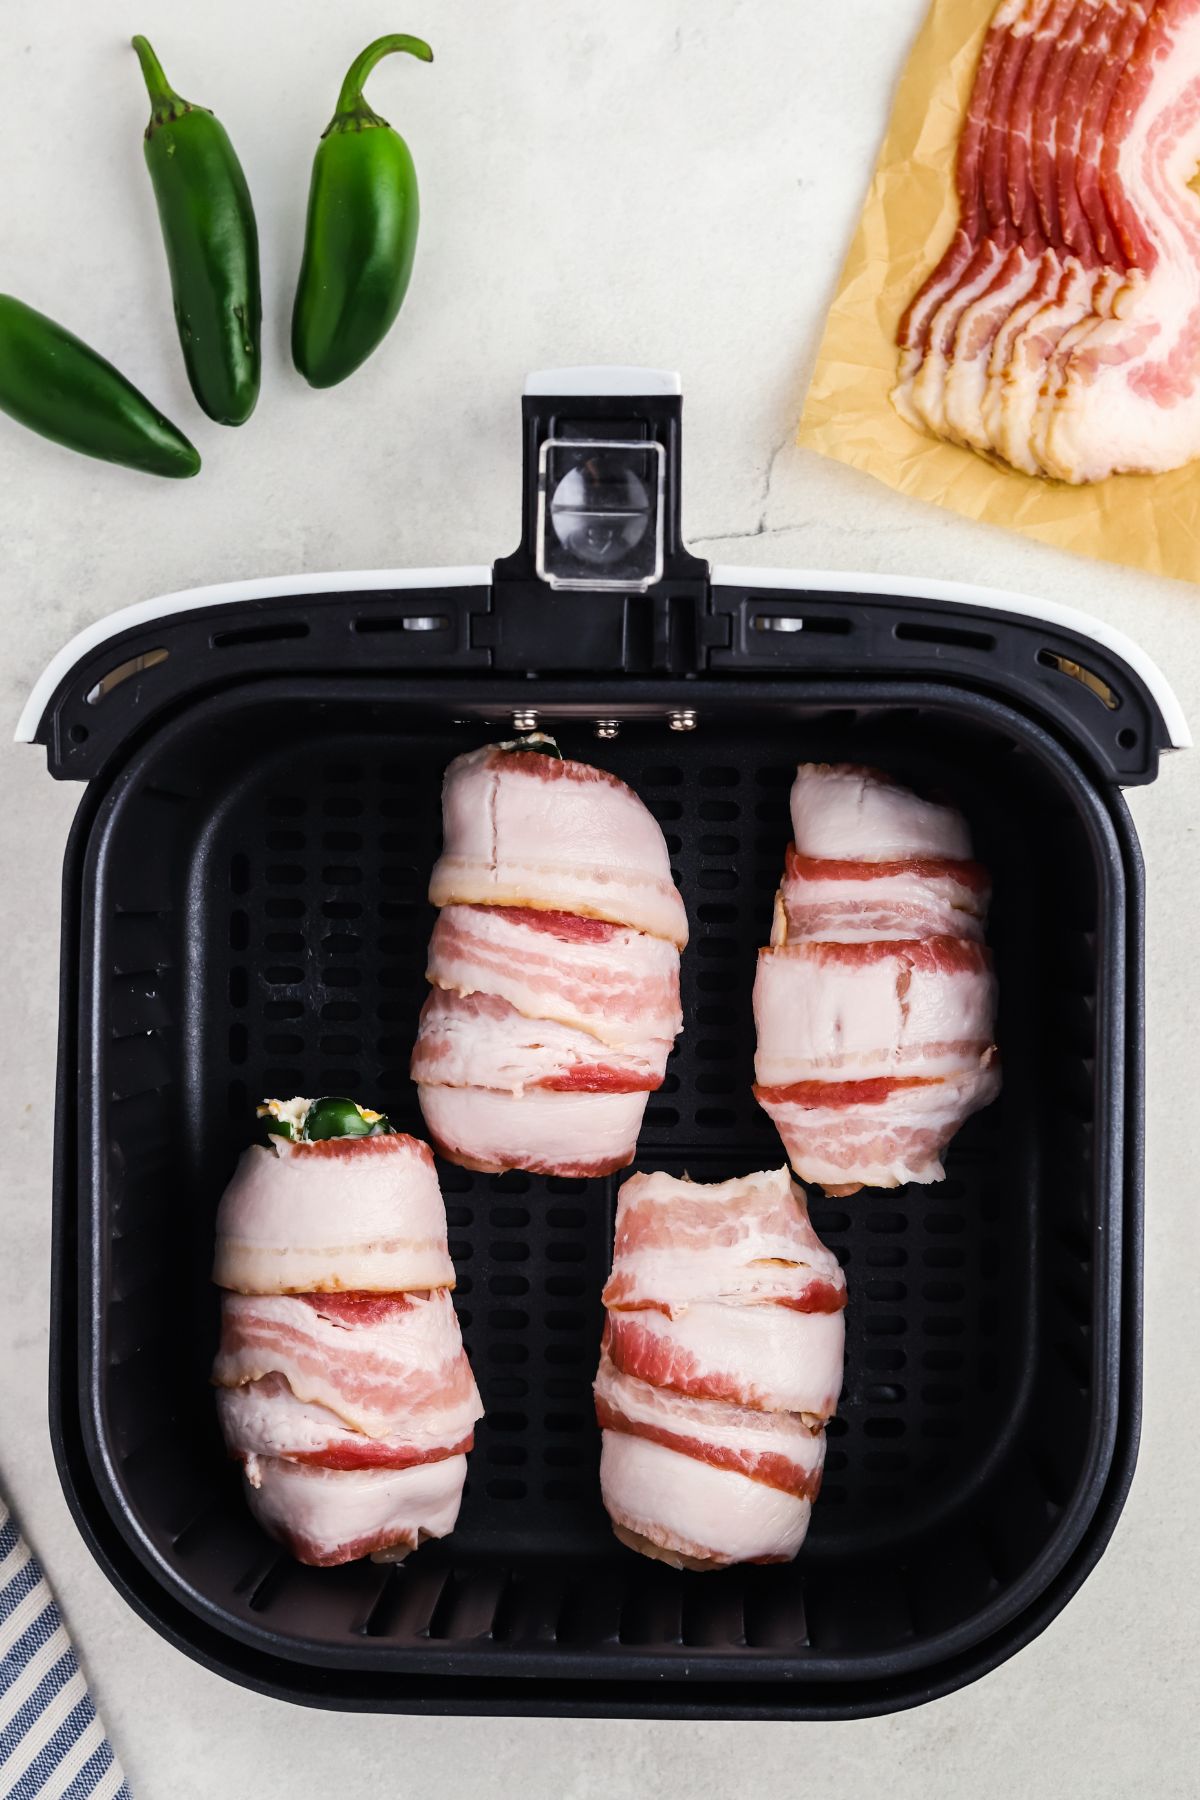 Bacon wrapped chicken and jalapeno poppers in the air fryer basket before being cooked